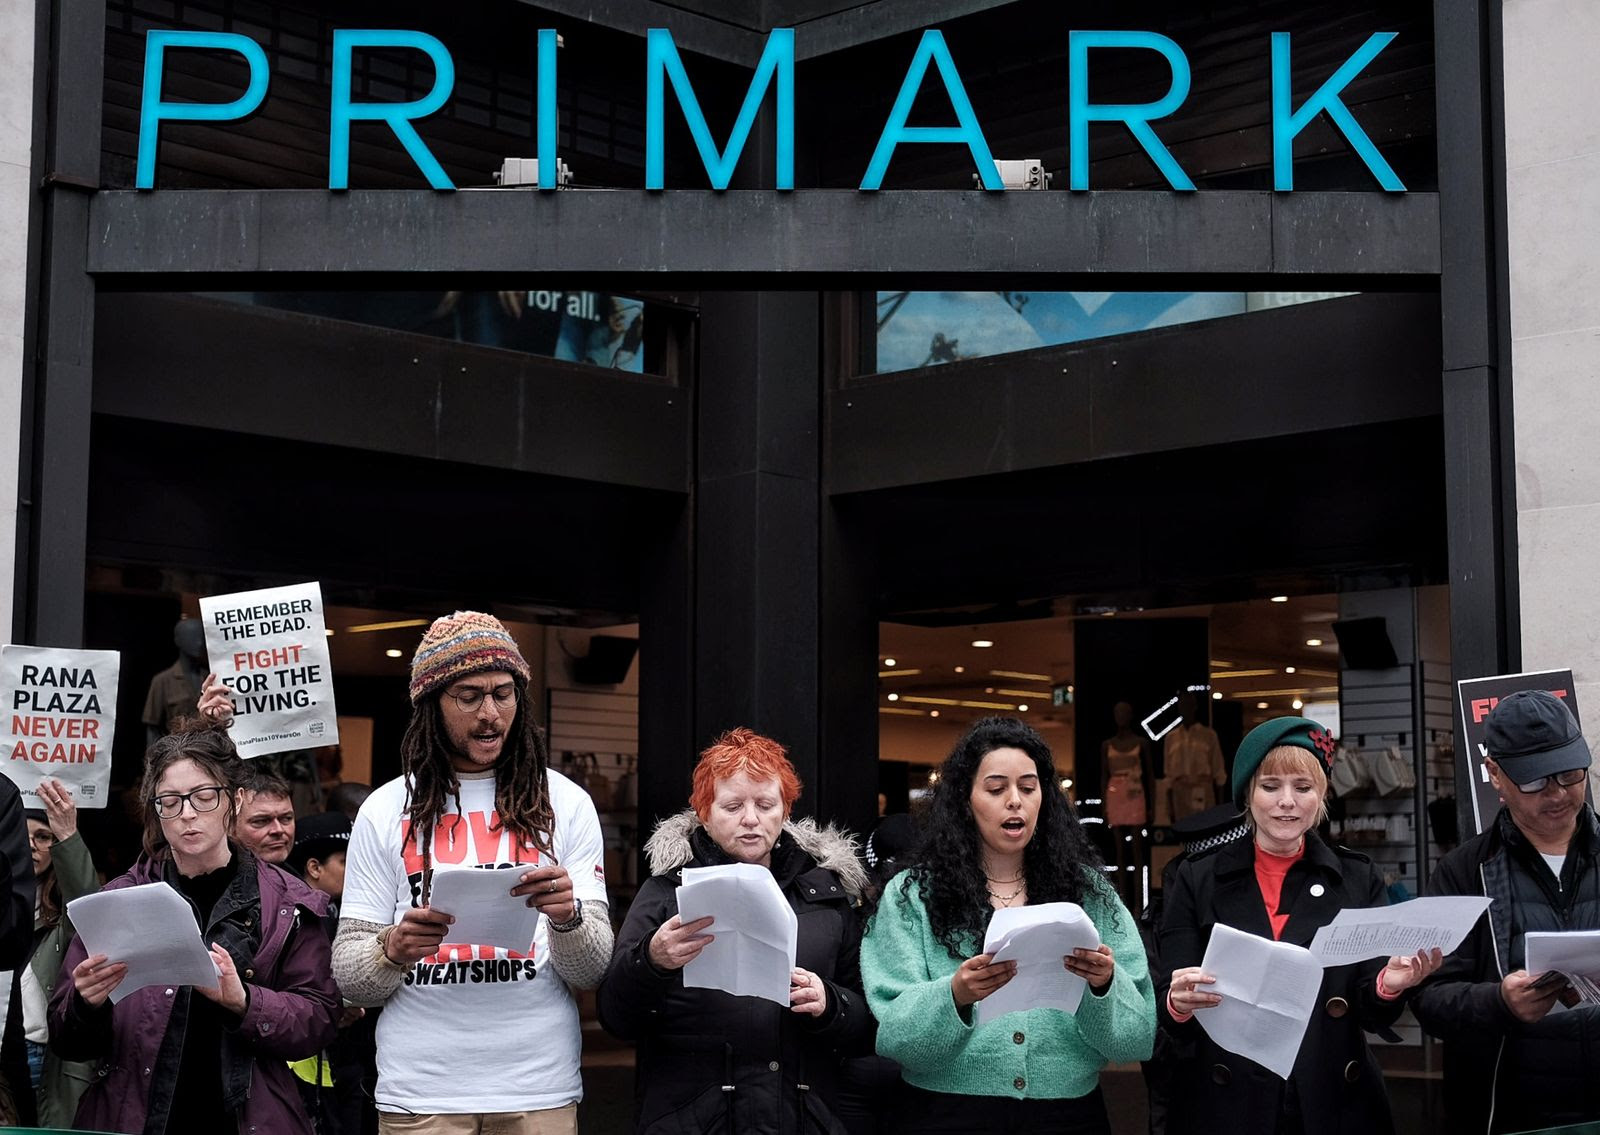 The final stop on the tour was to Name The Dead outside Primark's flagship store. We had 1,138 names to read.